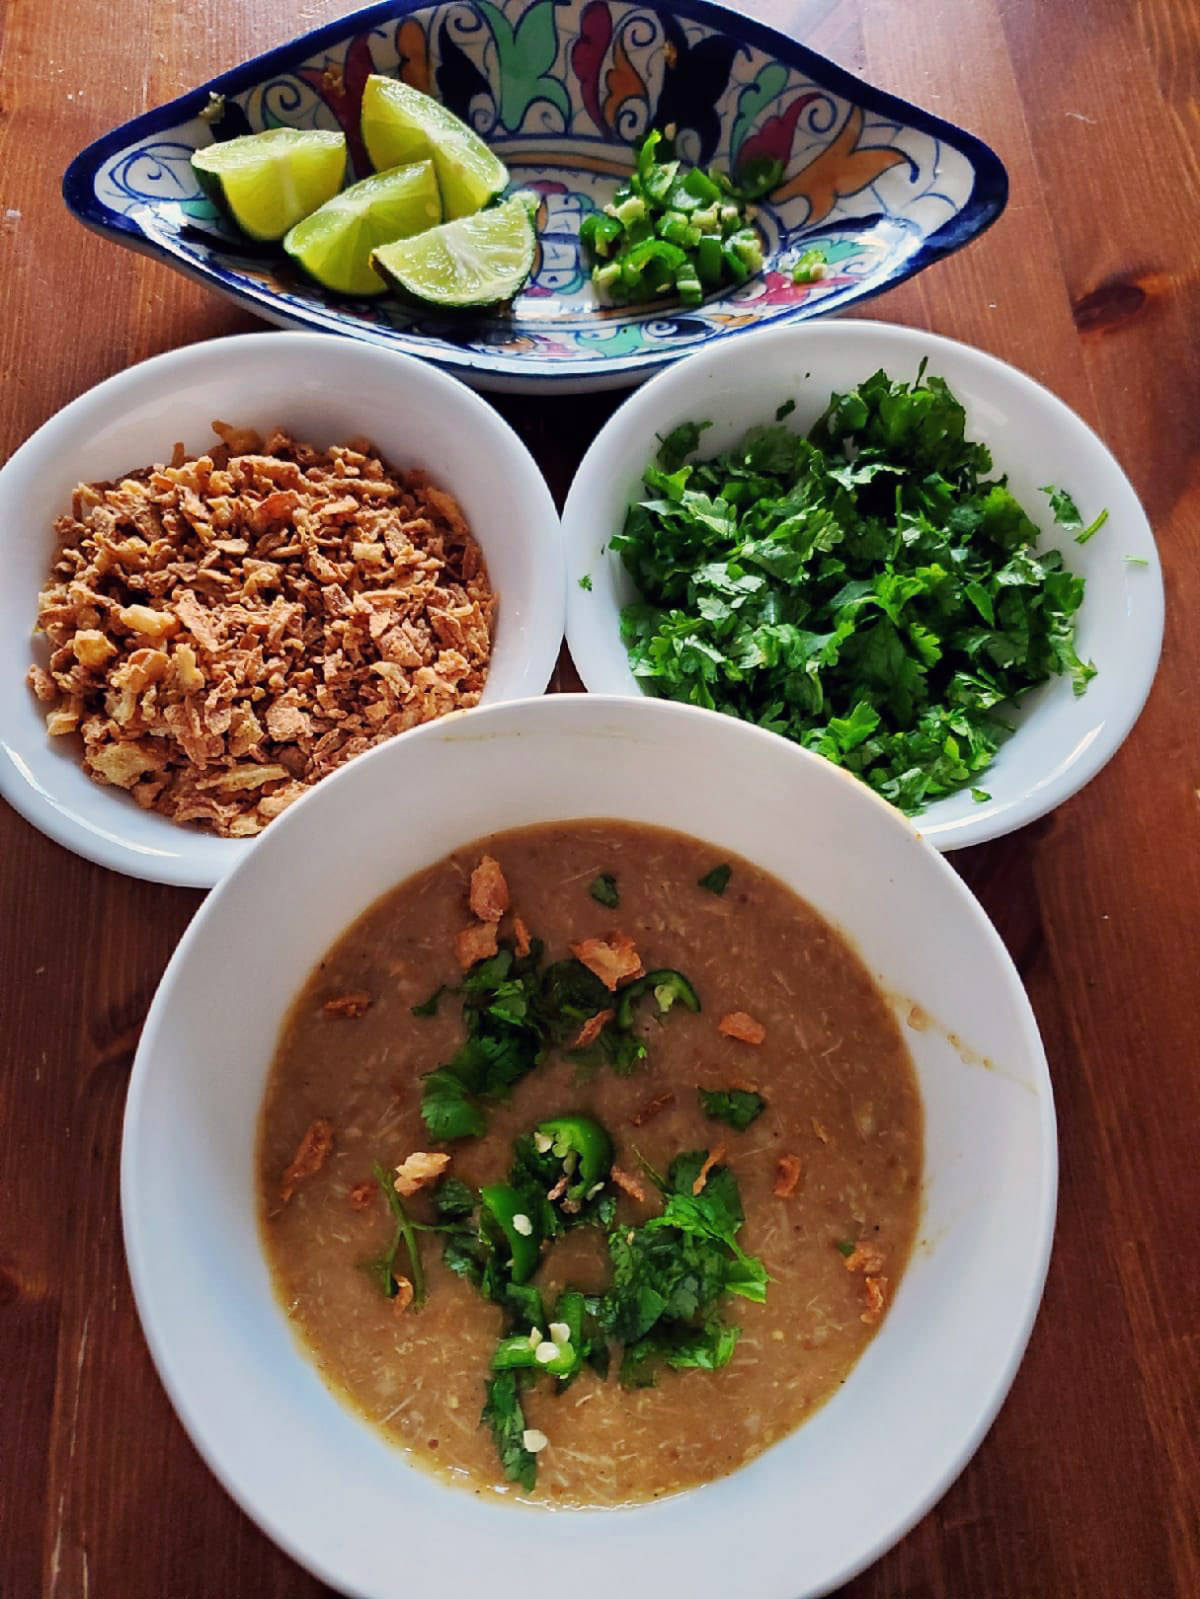 Photo of haleem, a South Asian dish of lentils and meat.